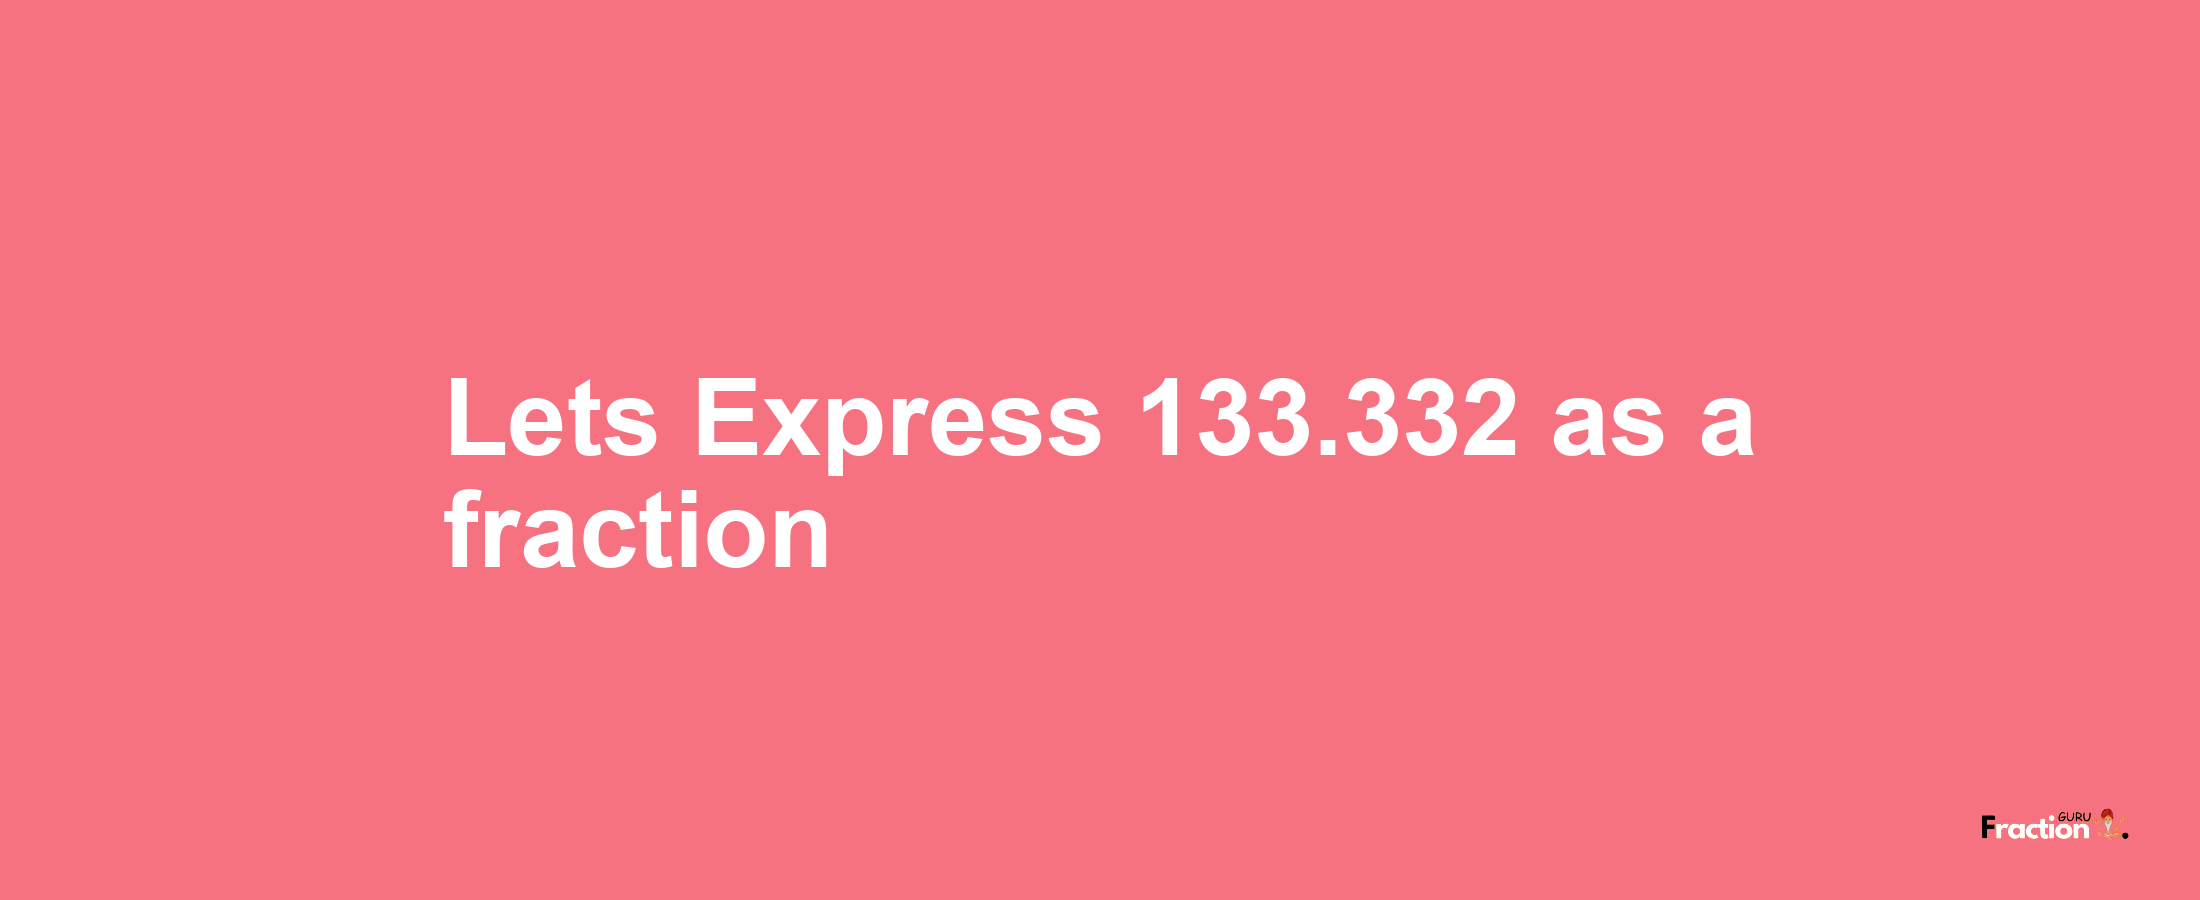 Lets Express 133.332 as afraction